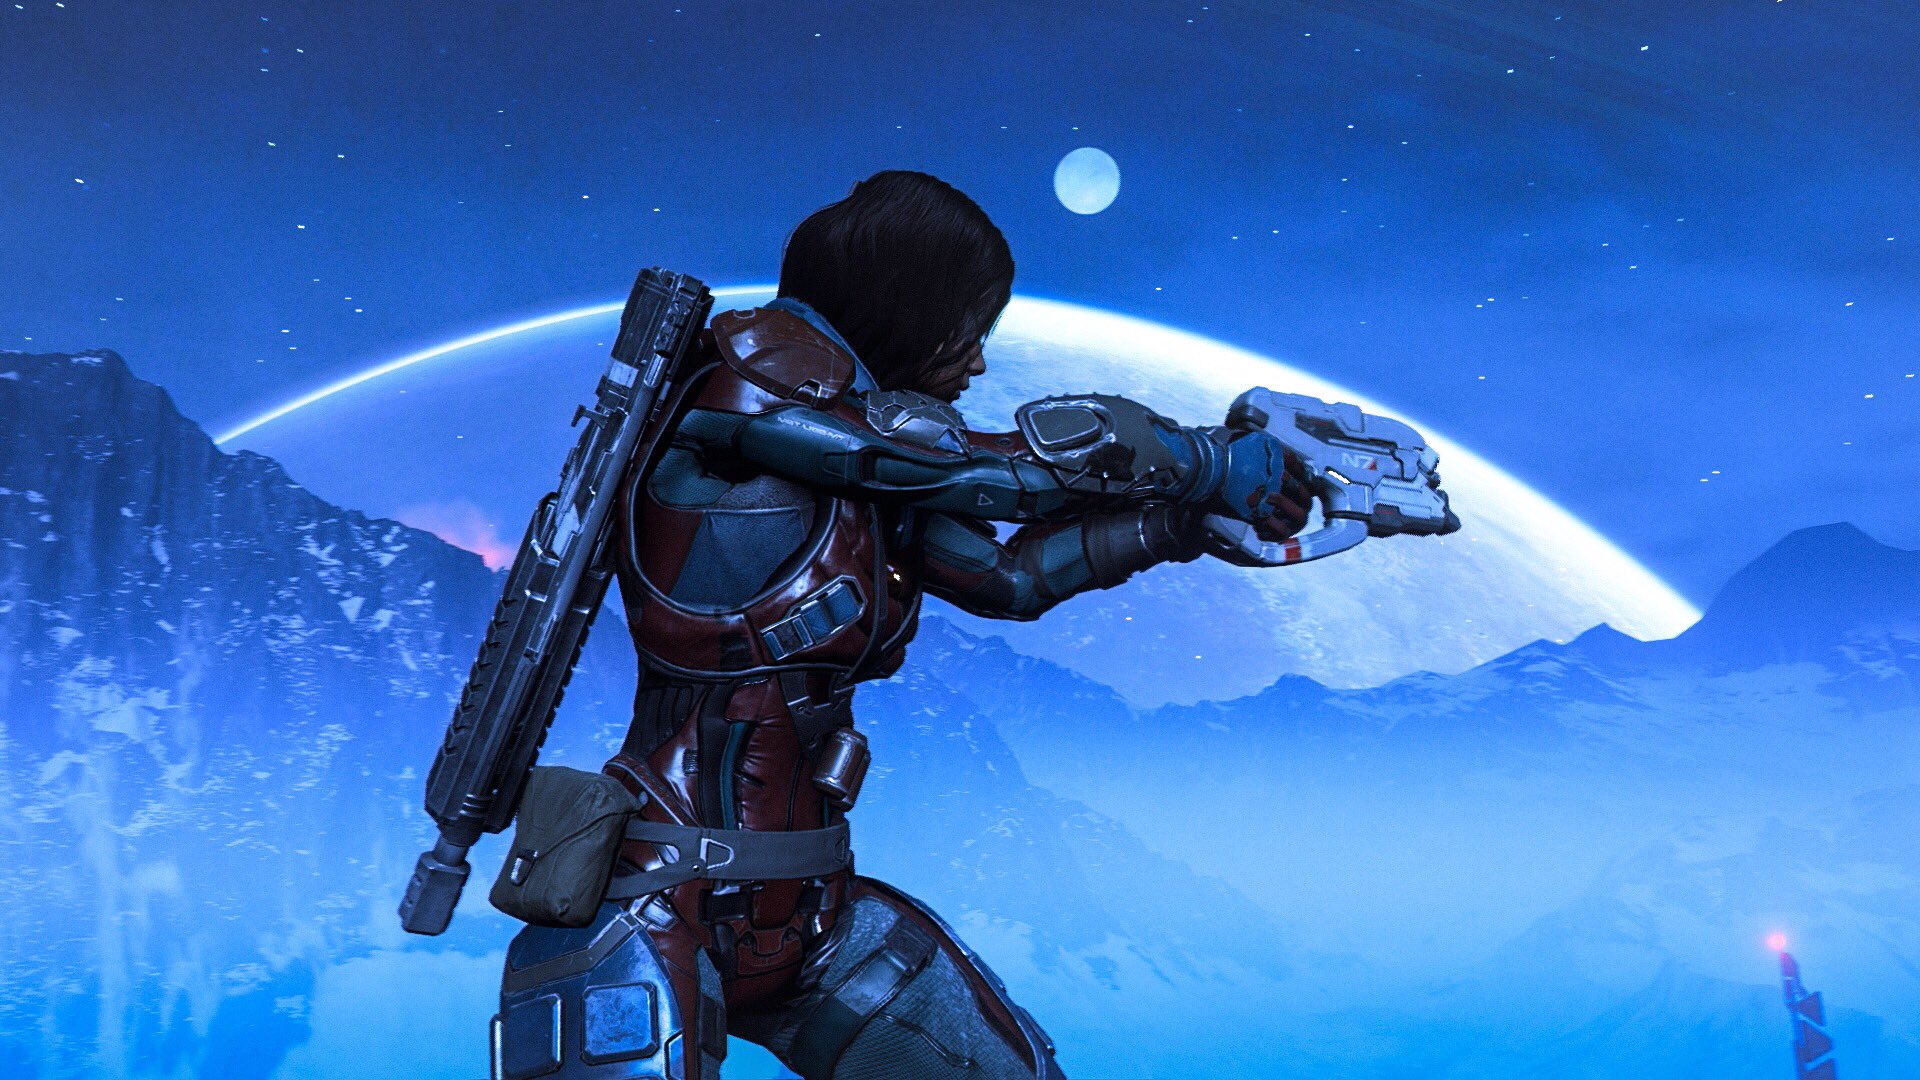 Mass Effect Andromeda - 4 New Gameplay Screenshots Released, Shows Character Models Detail